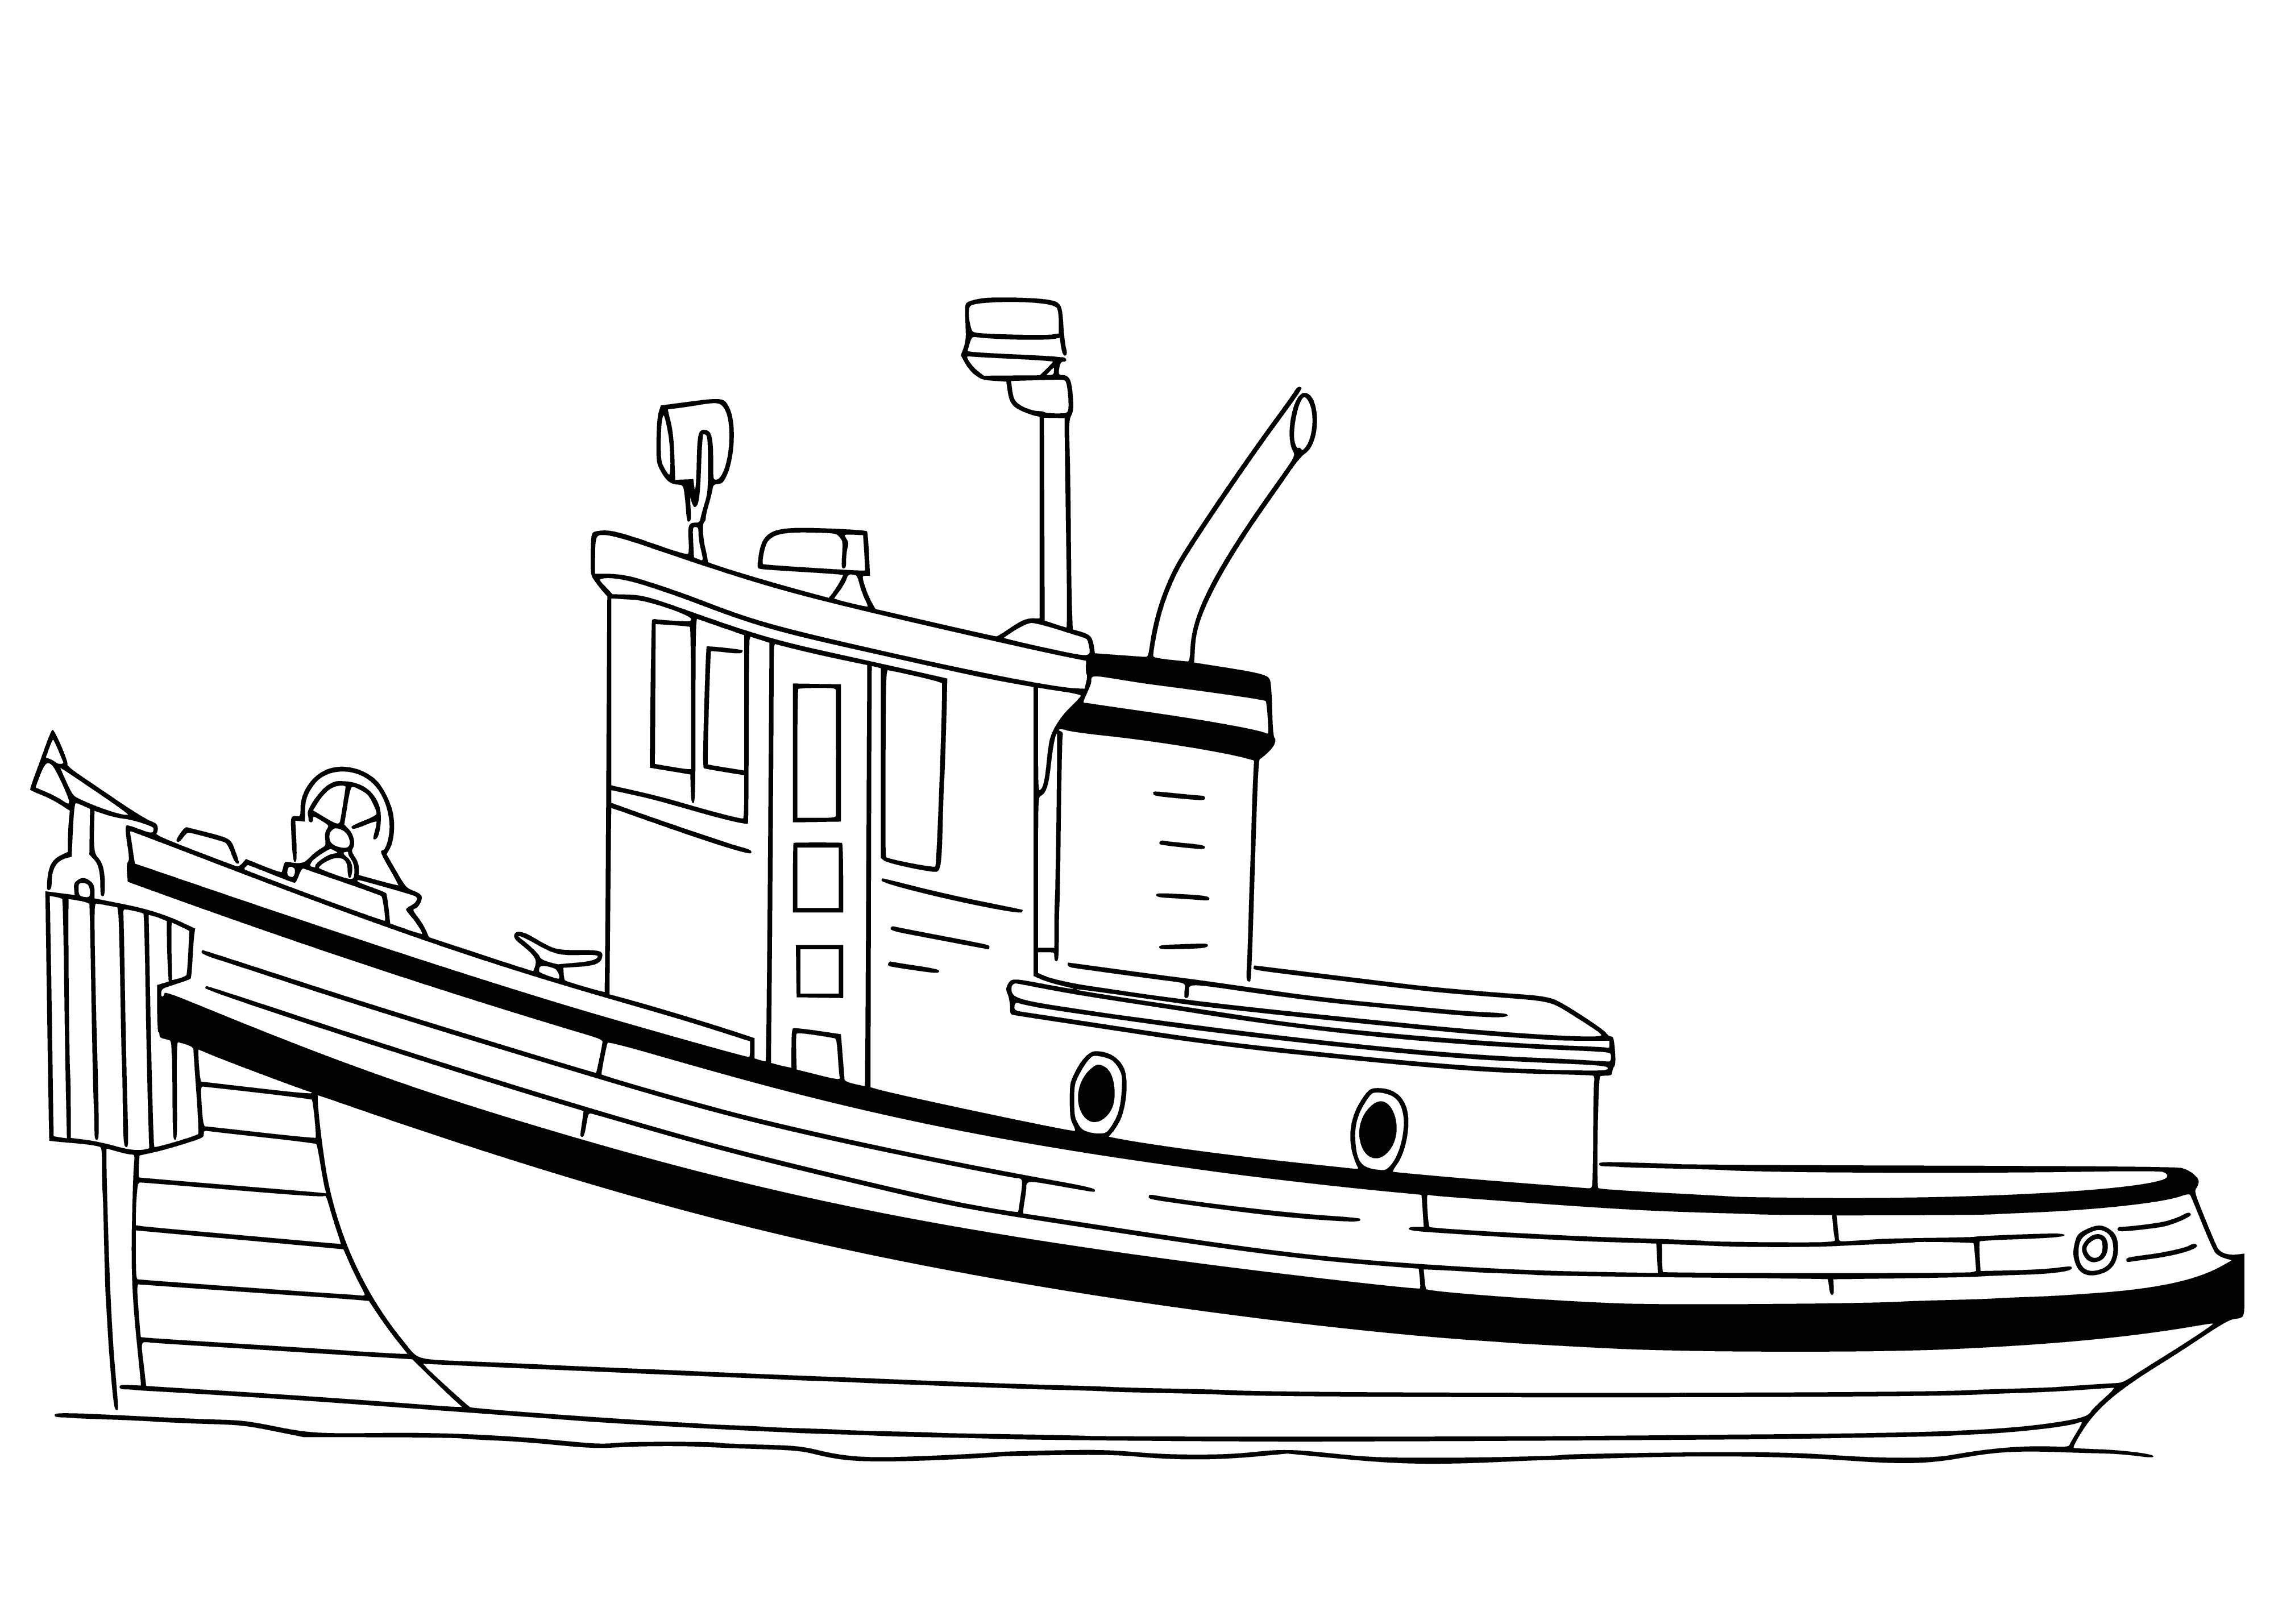 coloring page: A large boat is moving through the water with a white sail and a smaller boat is trailing behind, with people on board. #coloringpage